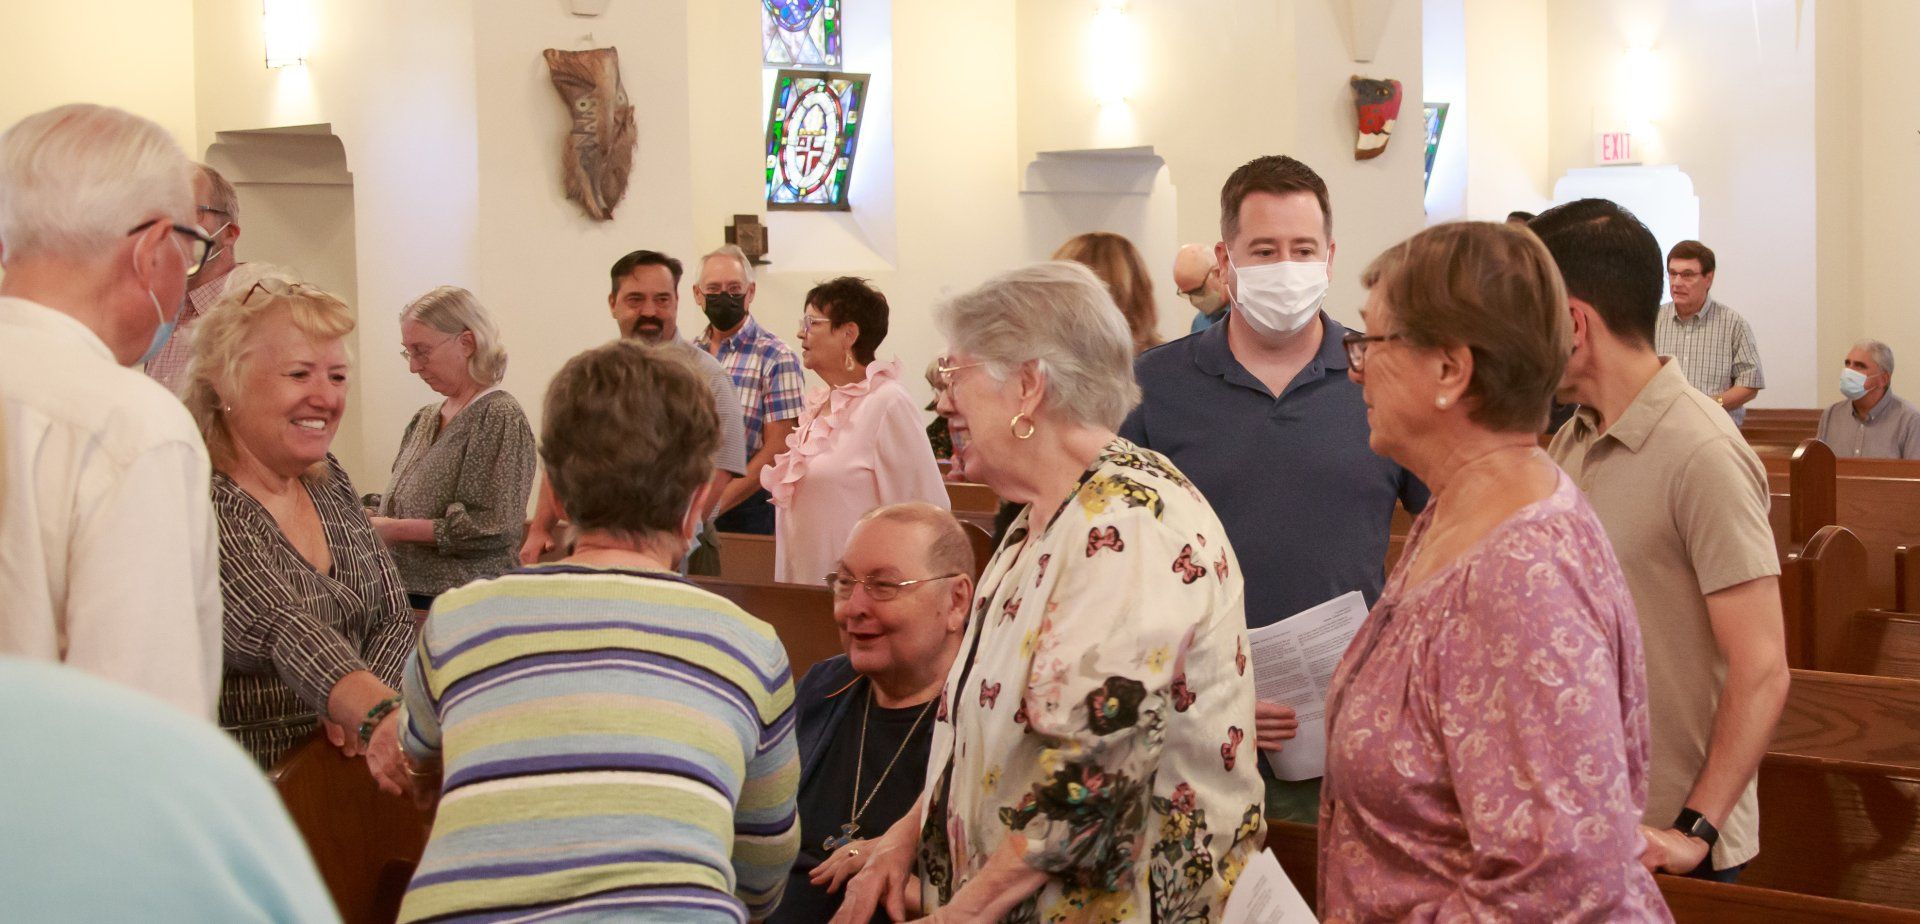 Parishioners greeting one another during the Peace of the People | Congregantes dándose la paz